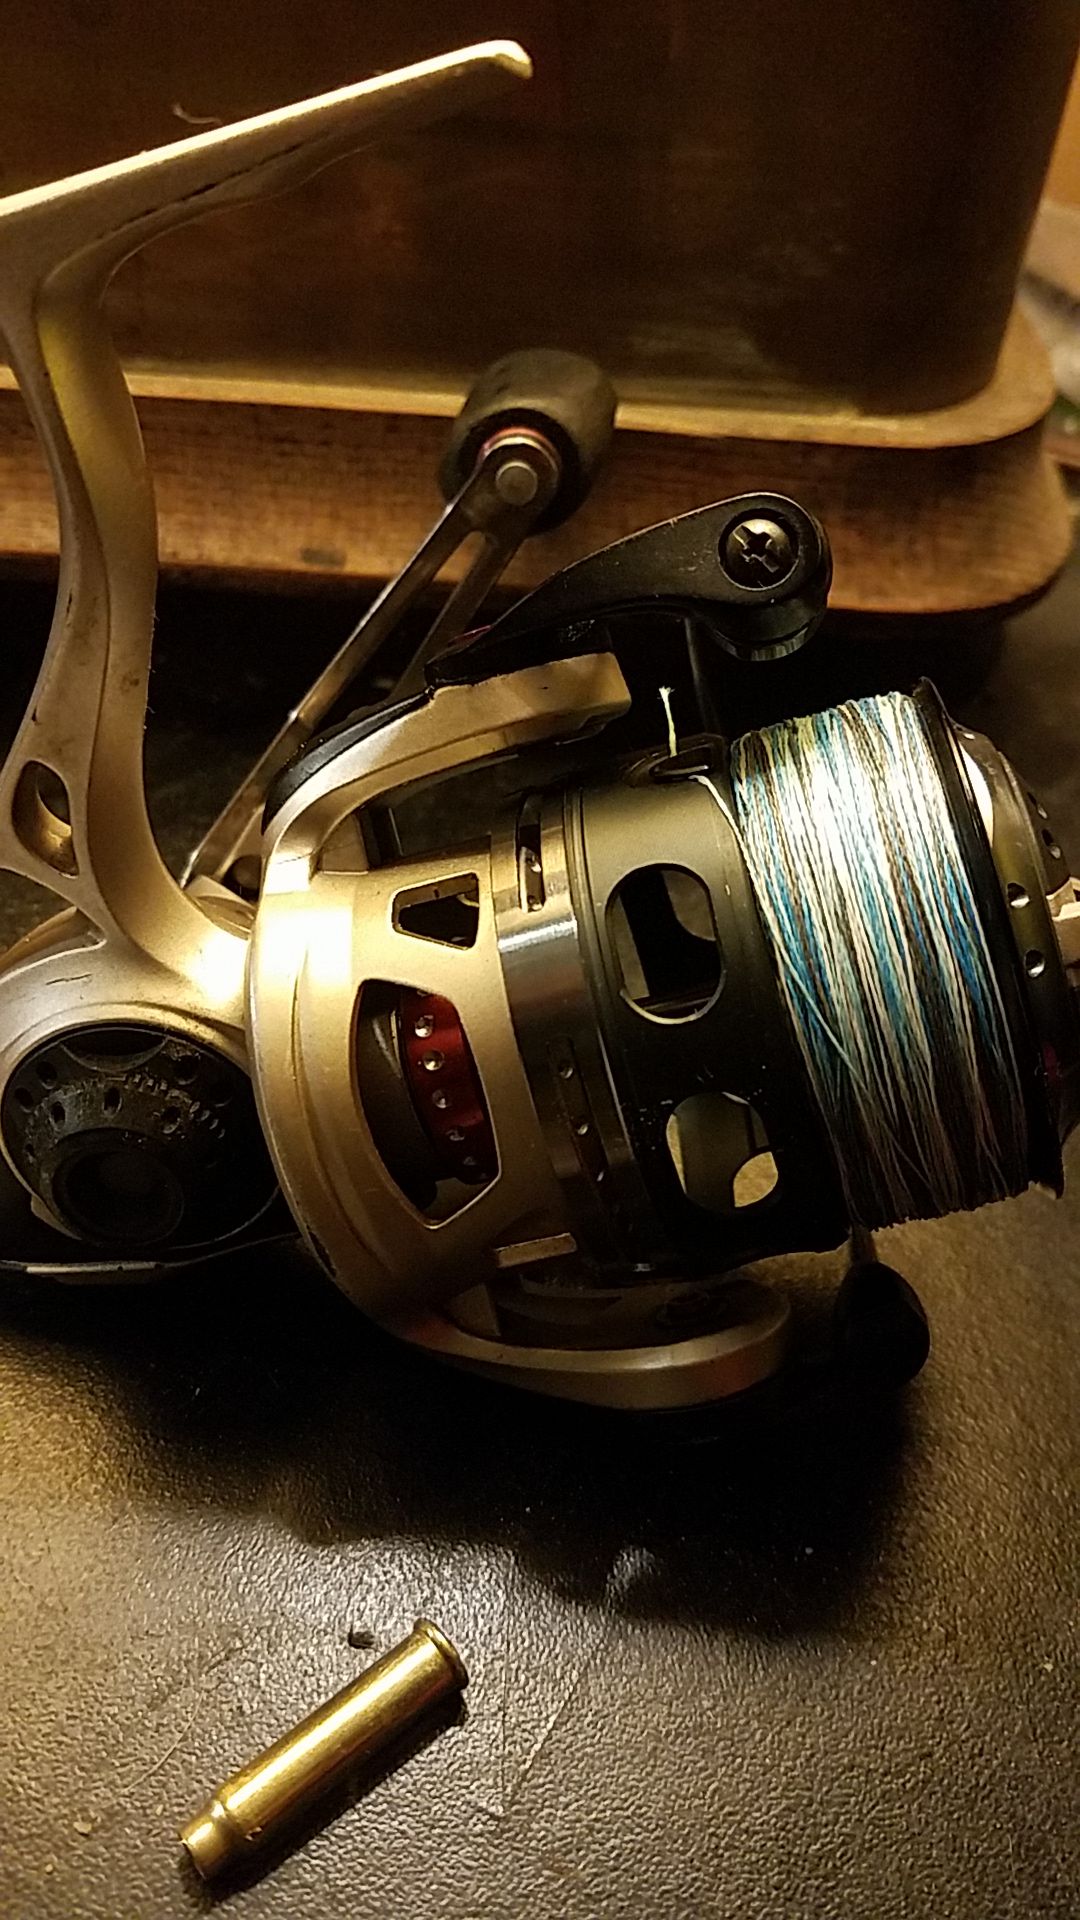 Quantum Exo 30 Pti Spinning Reel for Sale in New Port Richey, FL